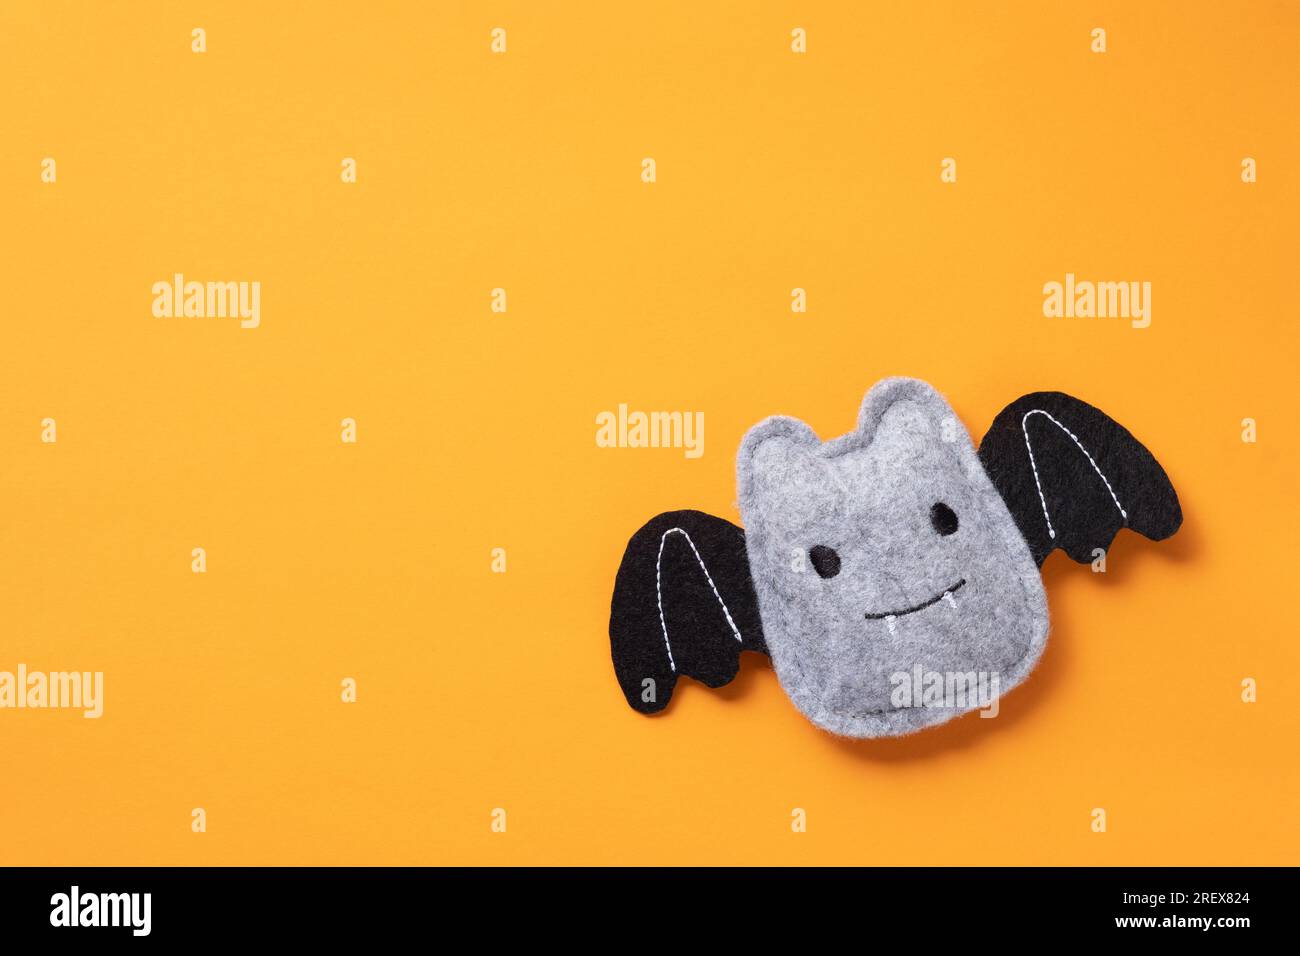 halloween and decoration concept - black bats toy Stock Photo